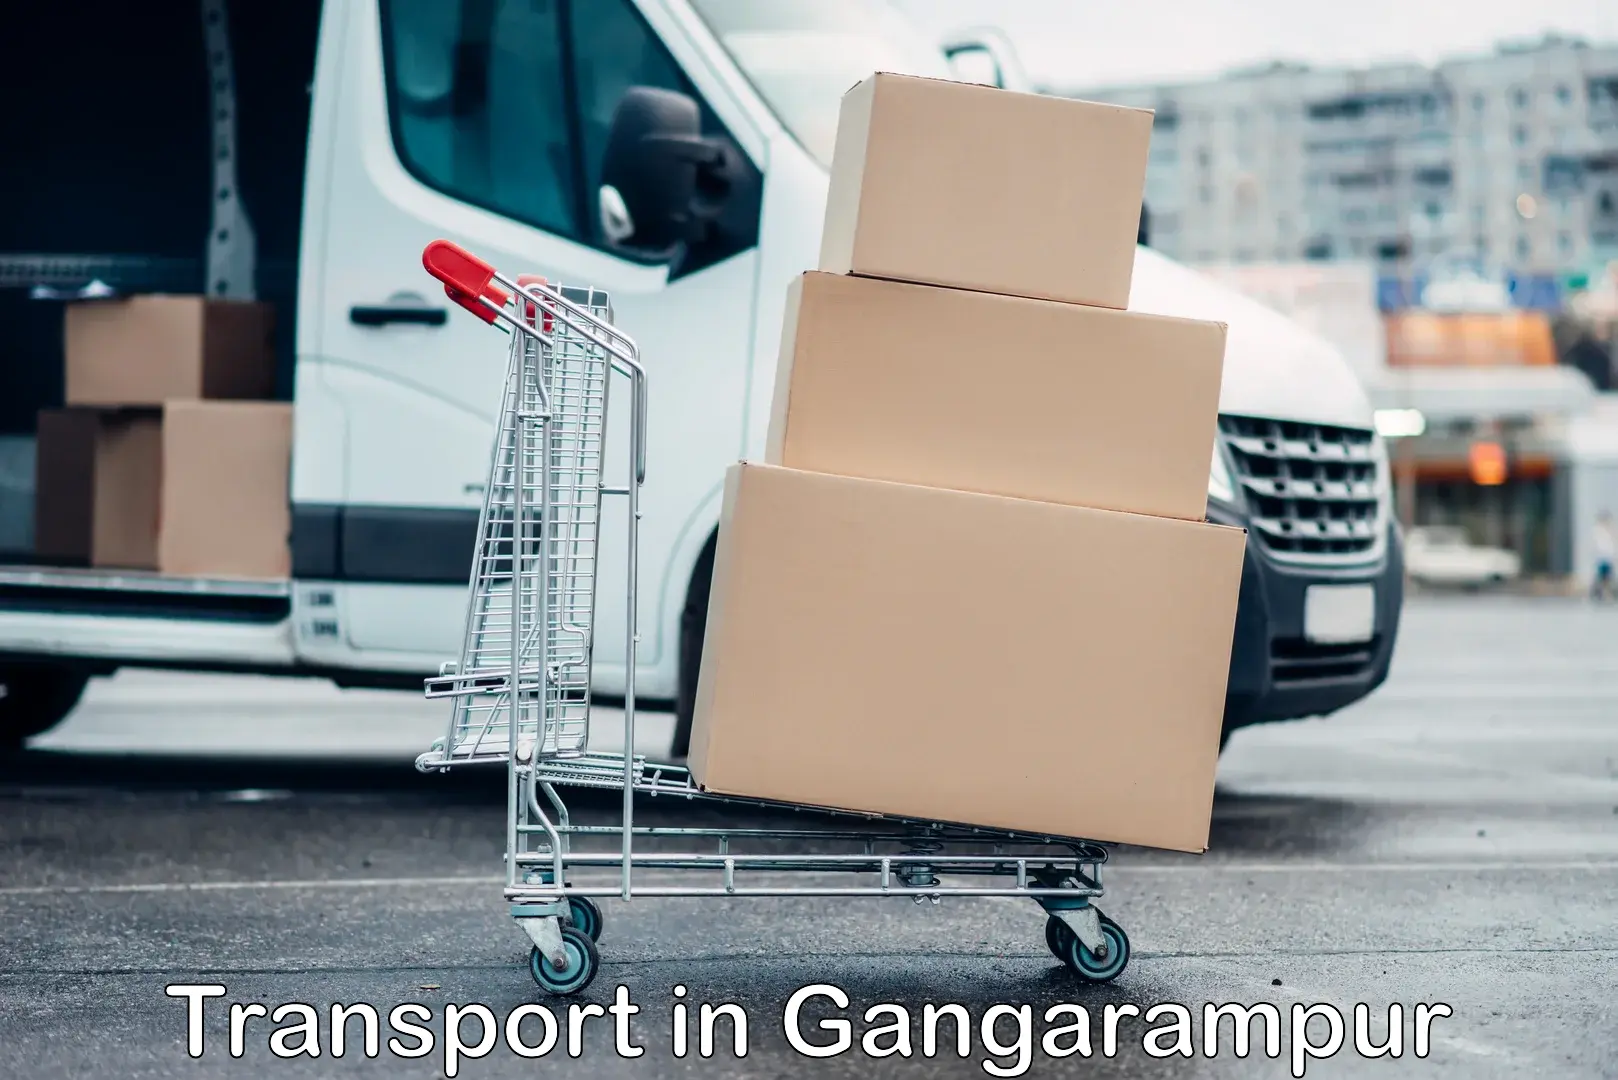 Container transportation services in Gangarampur